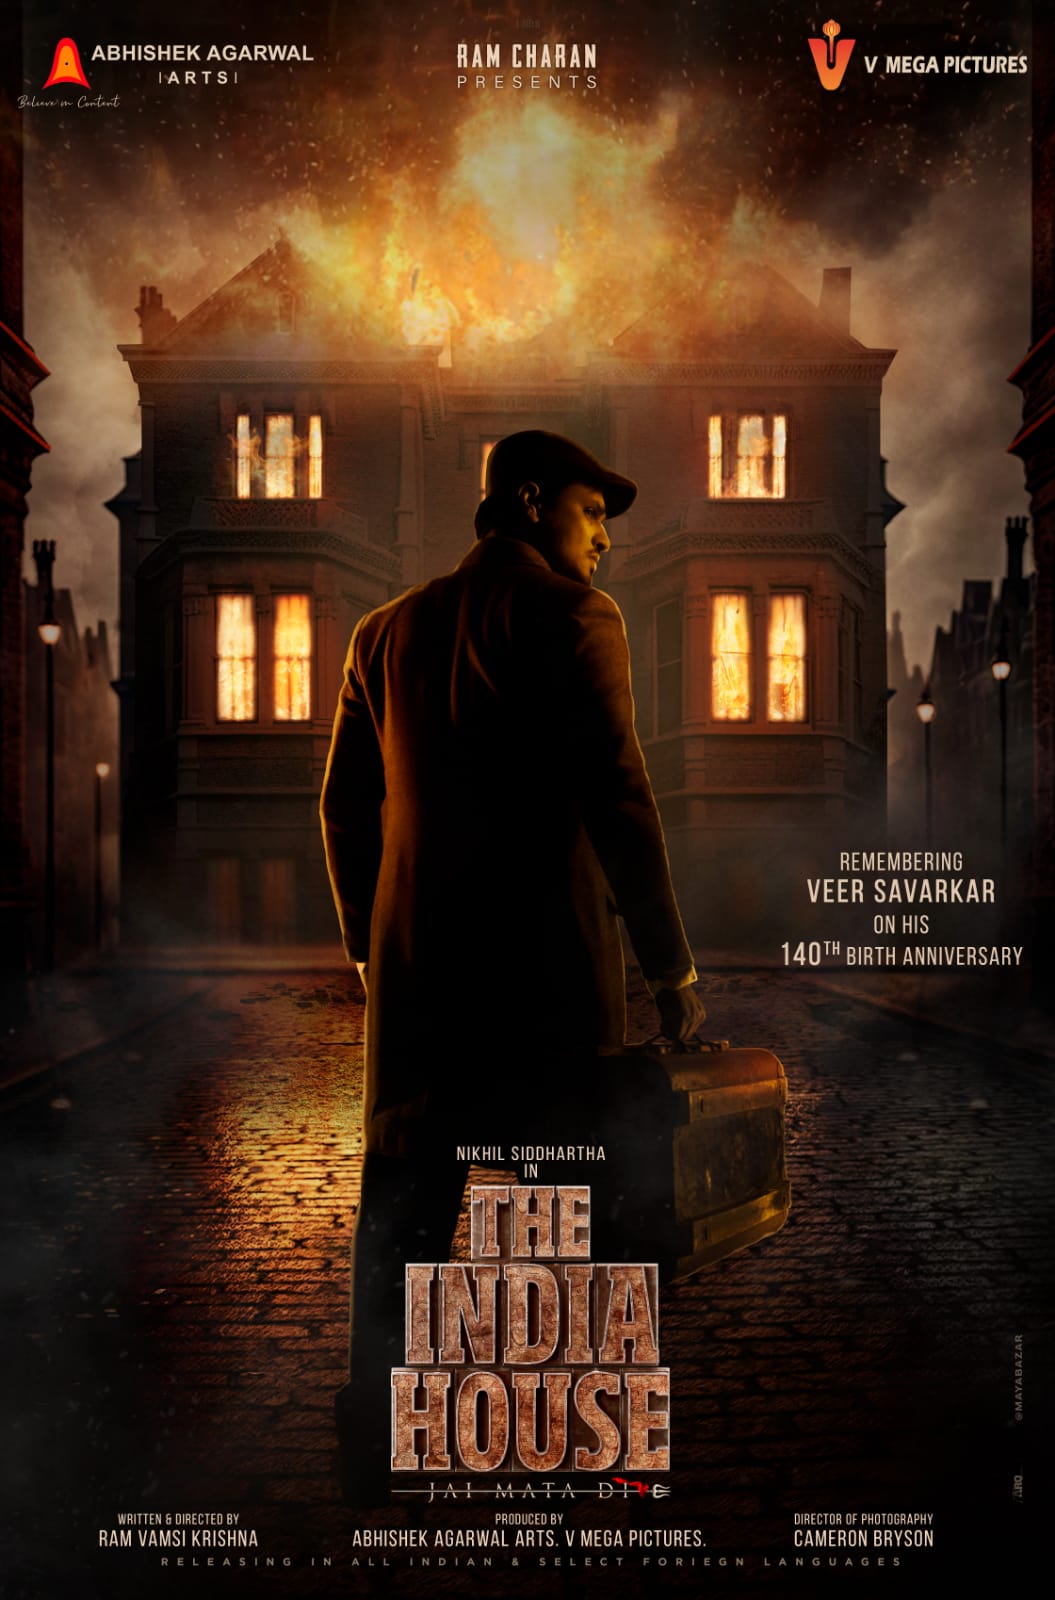 *Ram Charan and Vikram Reddy’s V Mega Pictures and Abhishek Agarwal Arts announce their first film ‘The India House’ with a power packed motion video !*